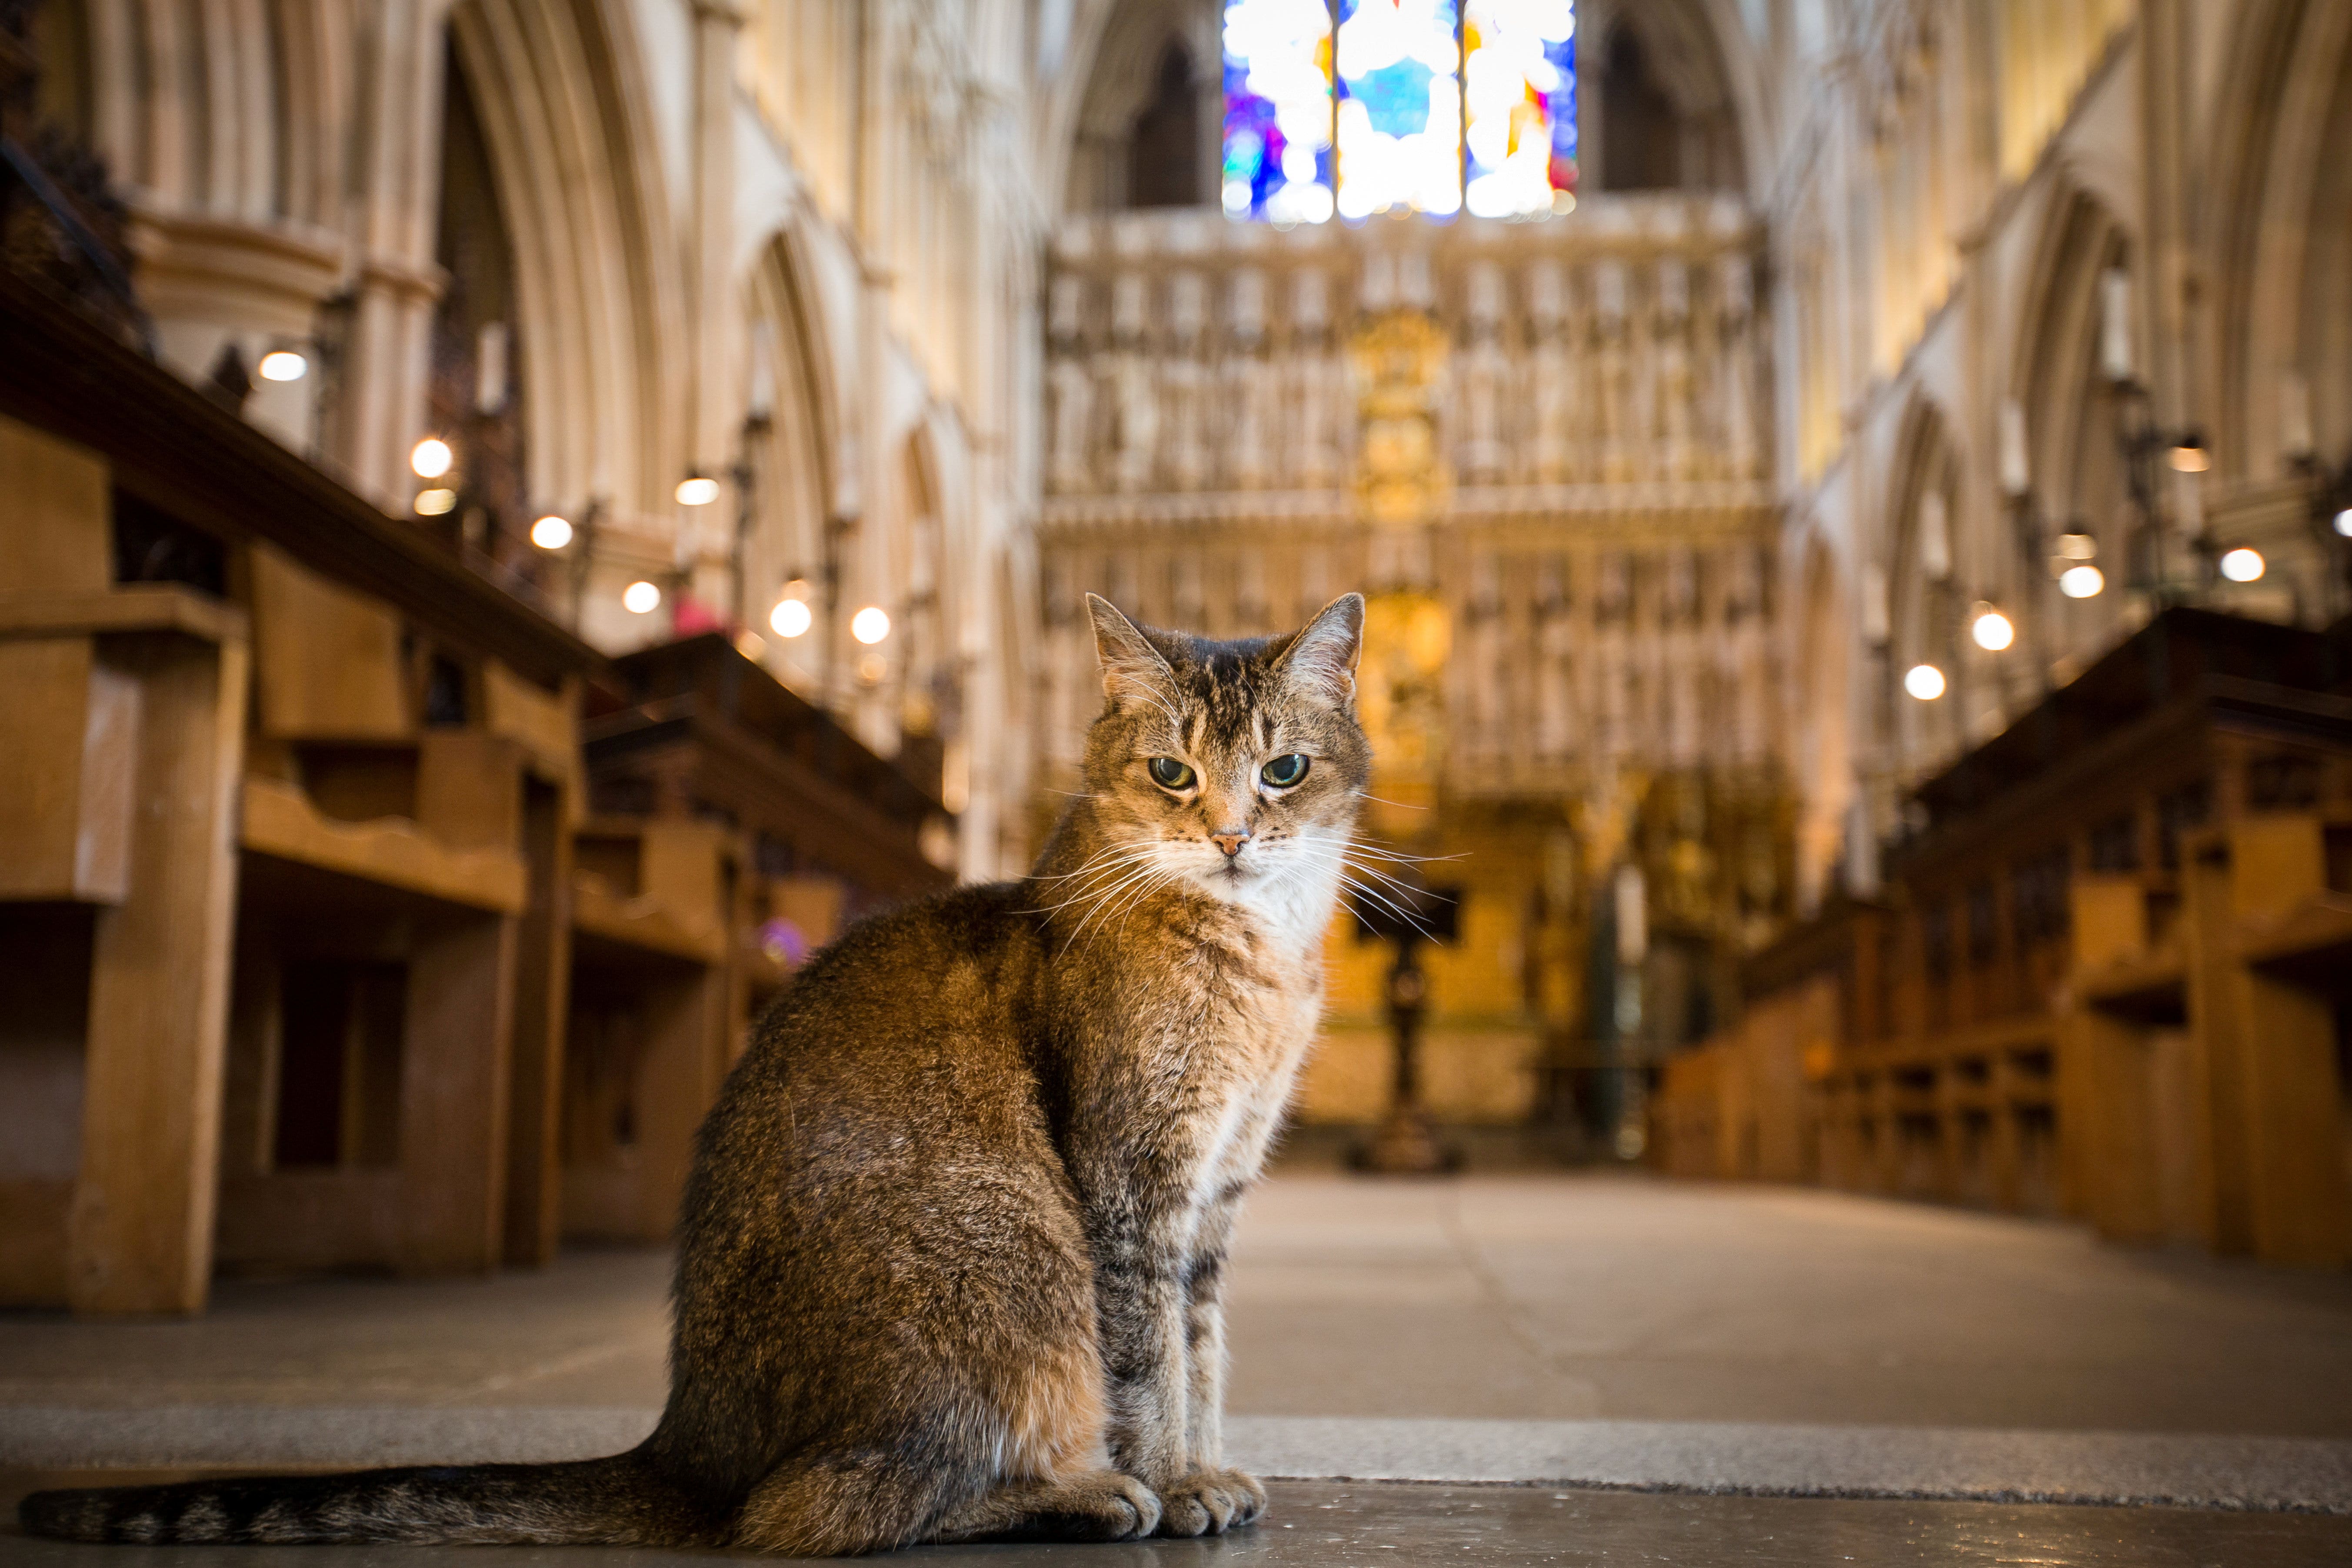 FOX NEWS: London cathedral honors beloved stray cat with memorial service October 31, 2020 at 06:03AM